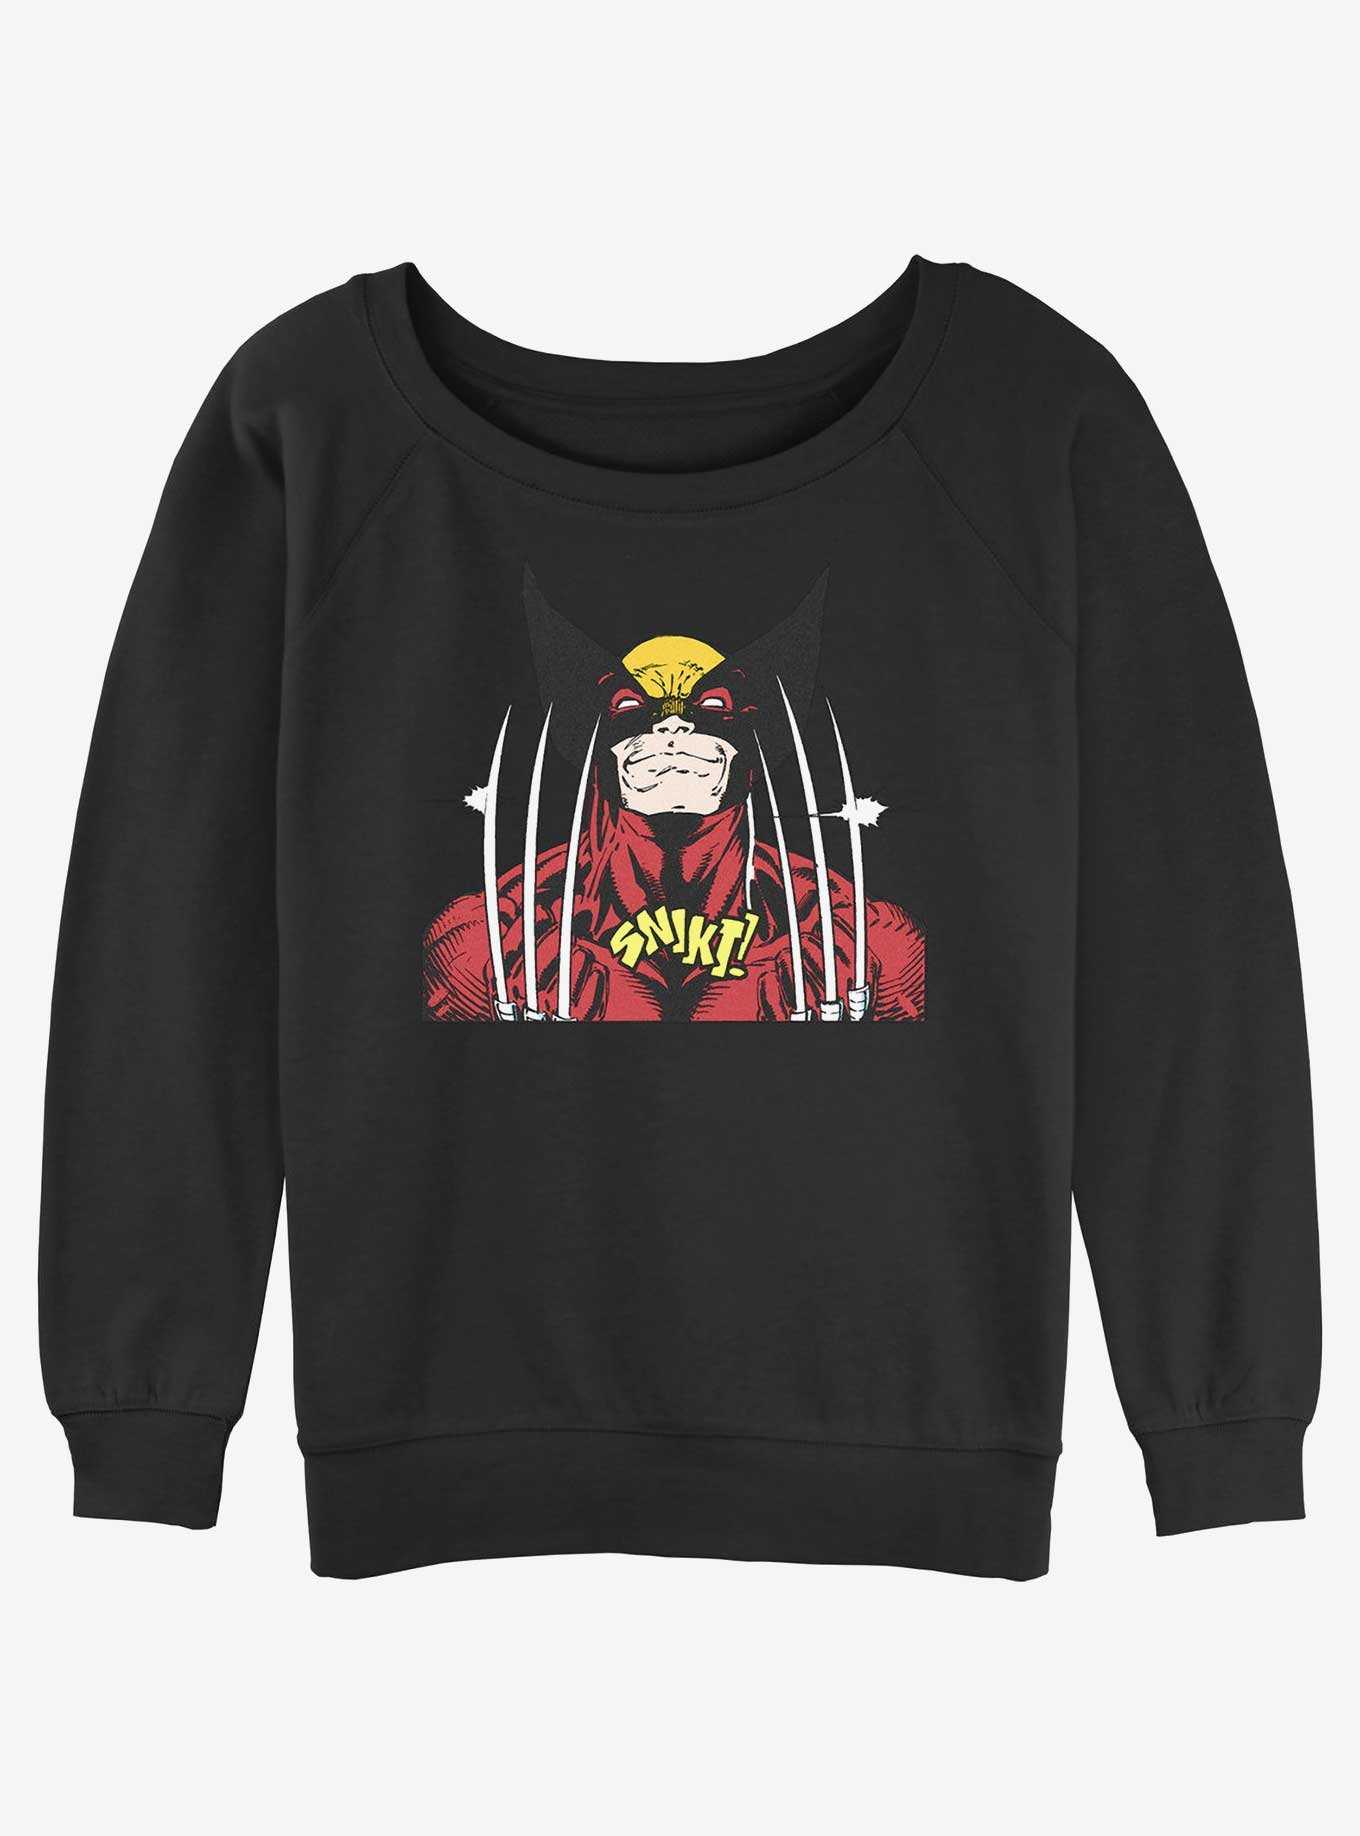 Wolverine Bring The Claws Womens Slouchy Sweatshirt, , hi-res